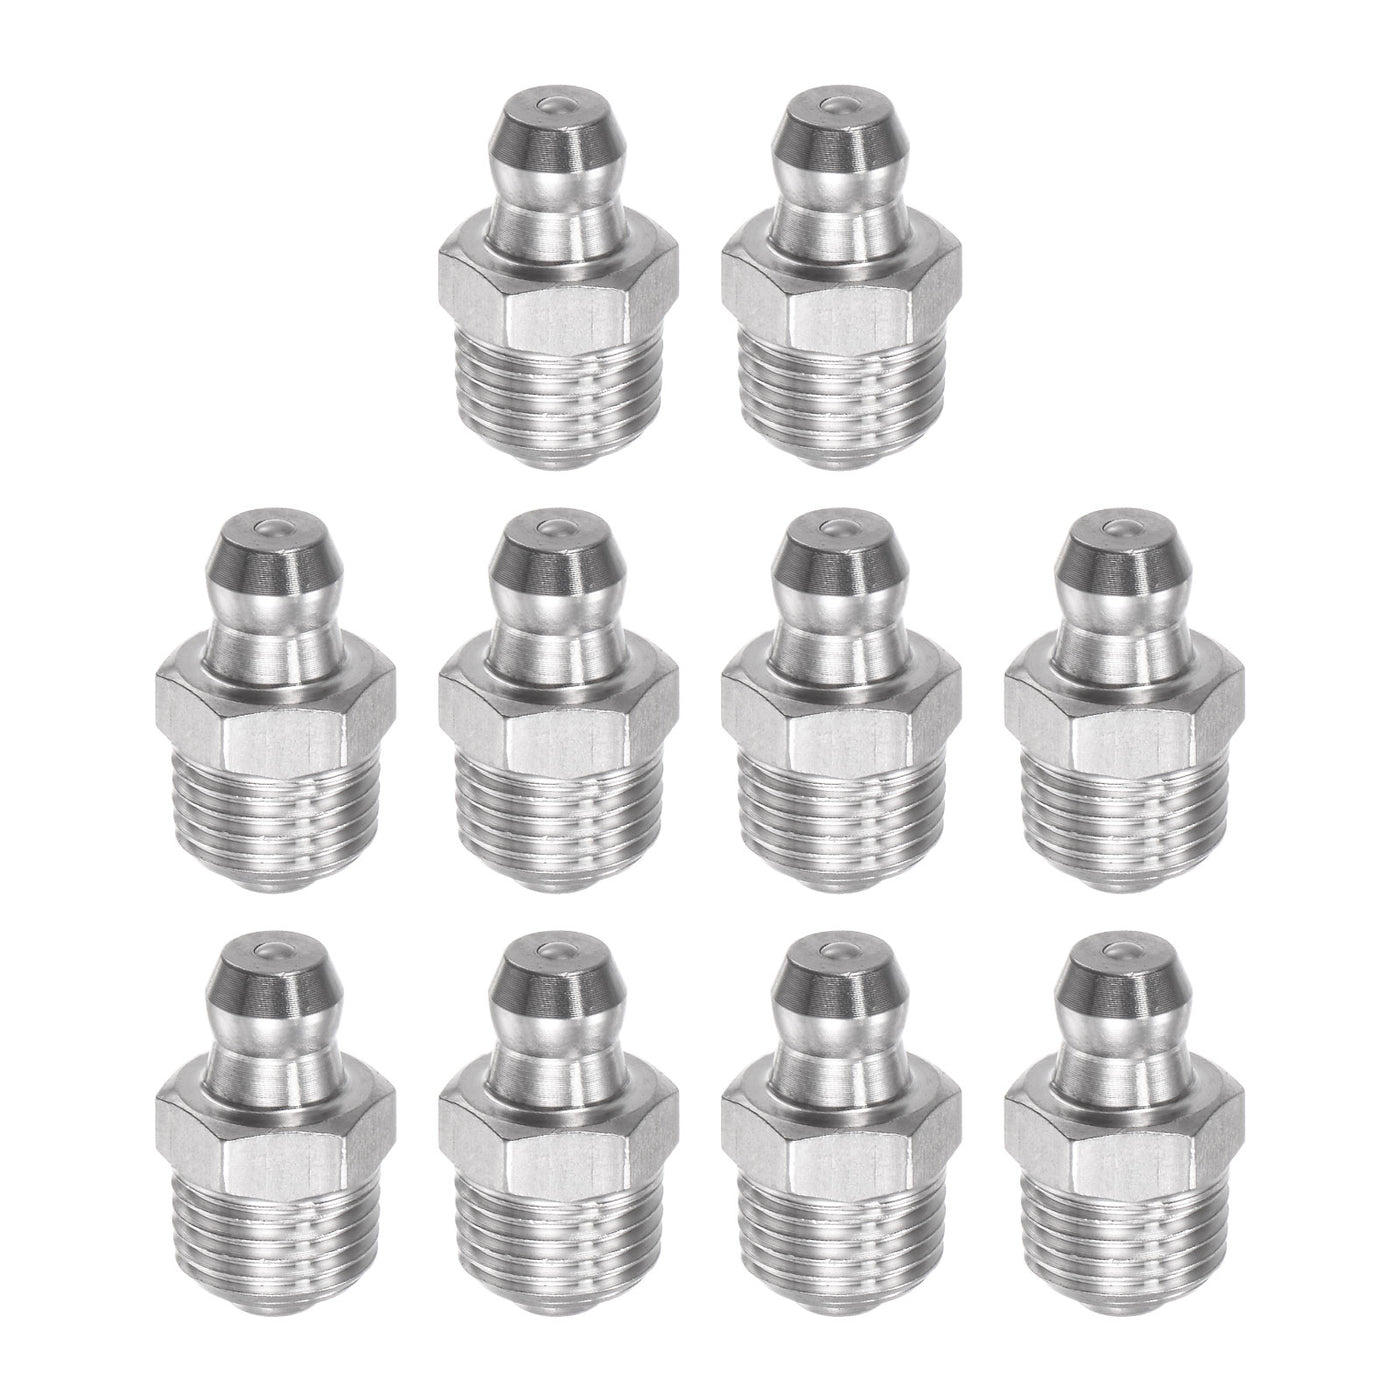 Uxcell Uxcell 304 Stainless Steel Straight Hydraulic Grease Fitting M6 x 1mm Thread, 10Pcs